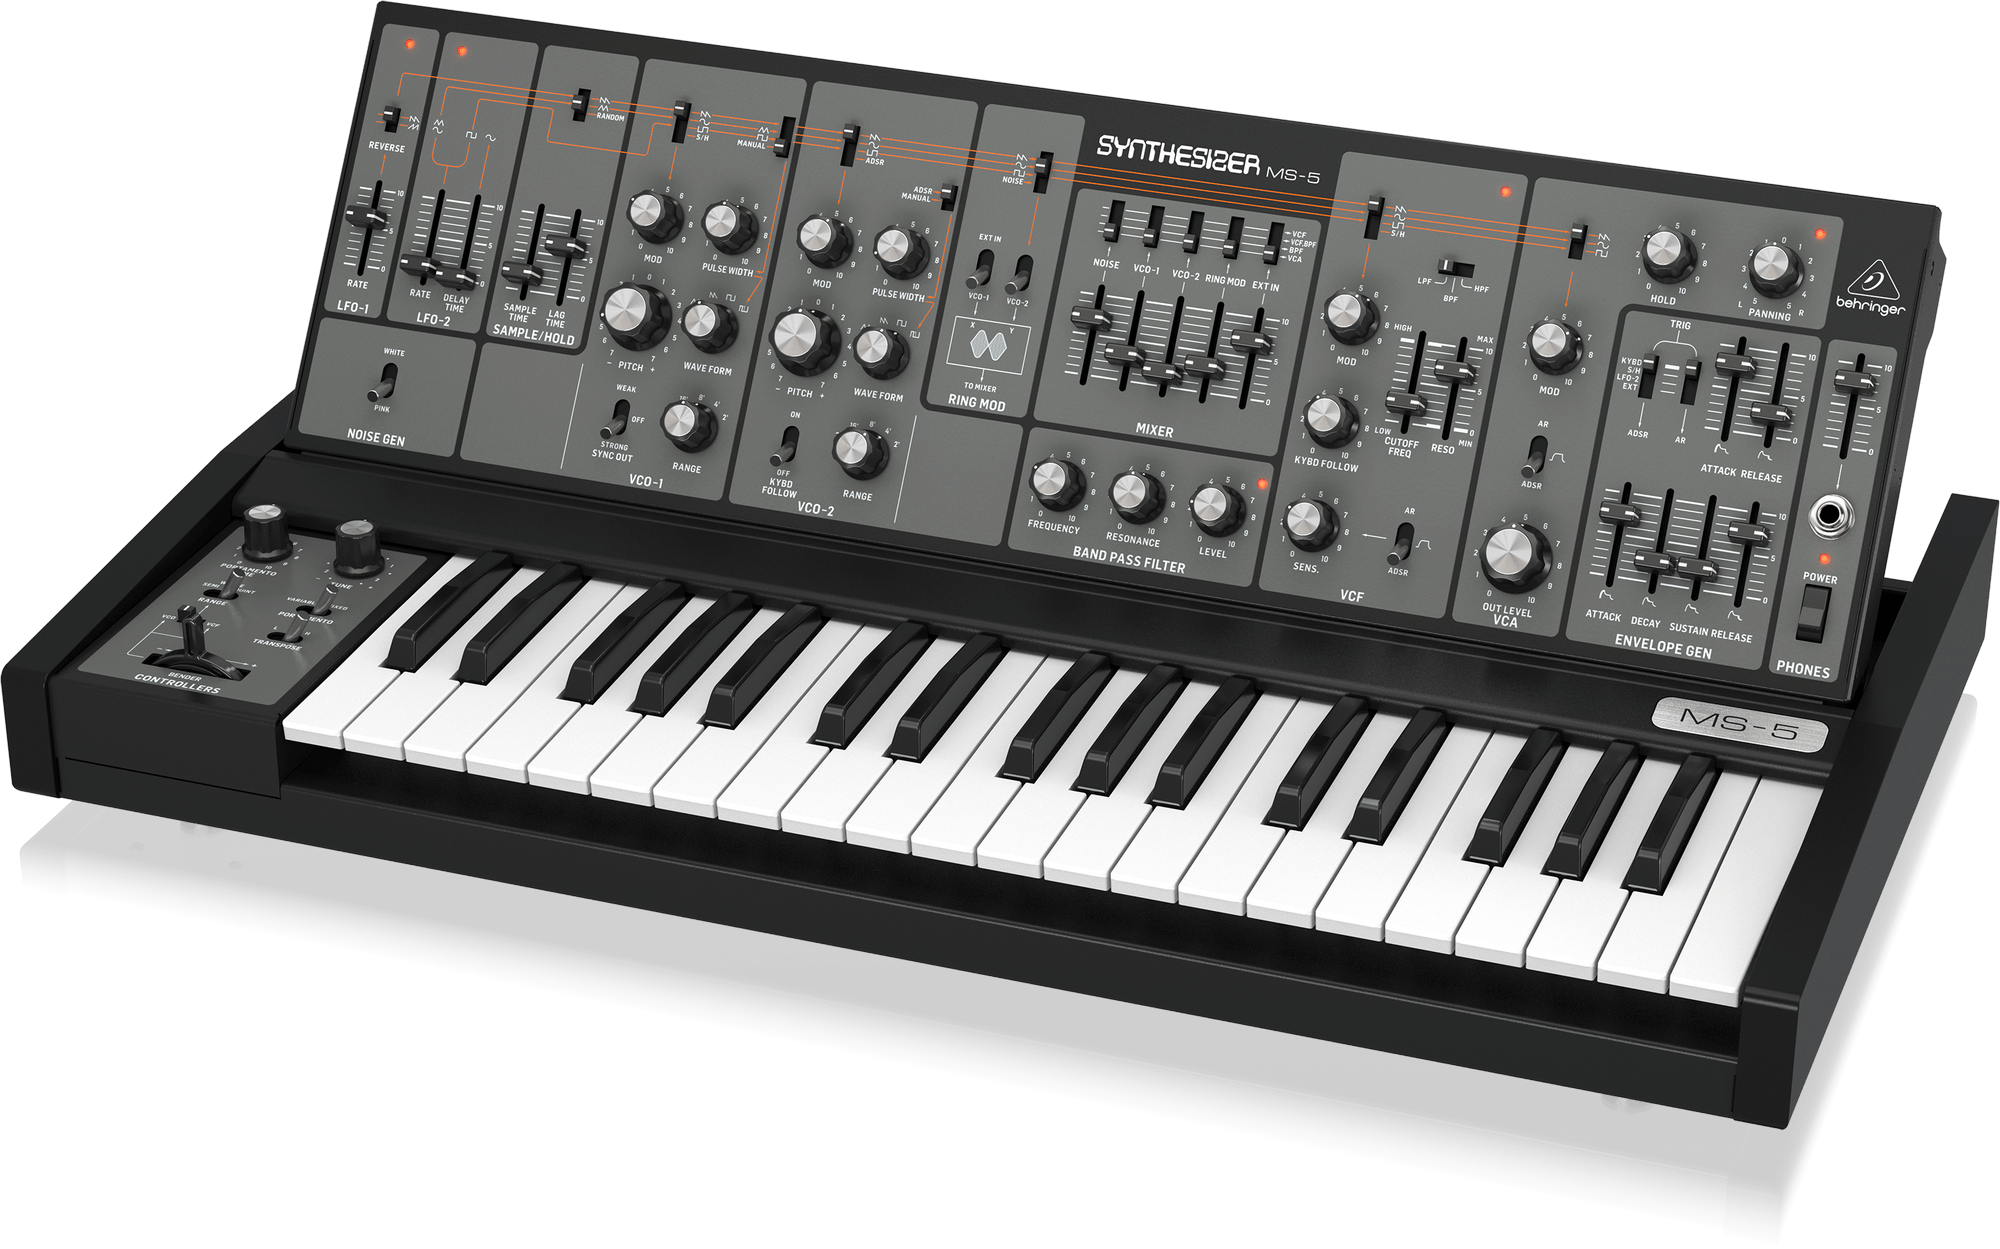 Behringer Synthesizer Ms 5